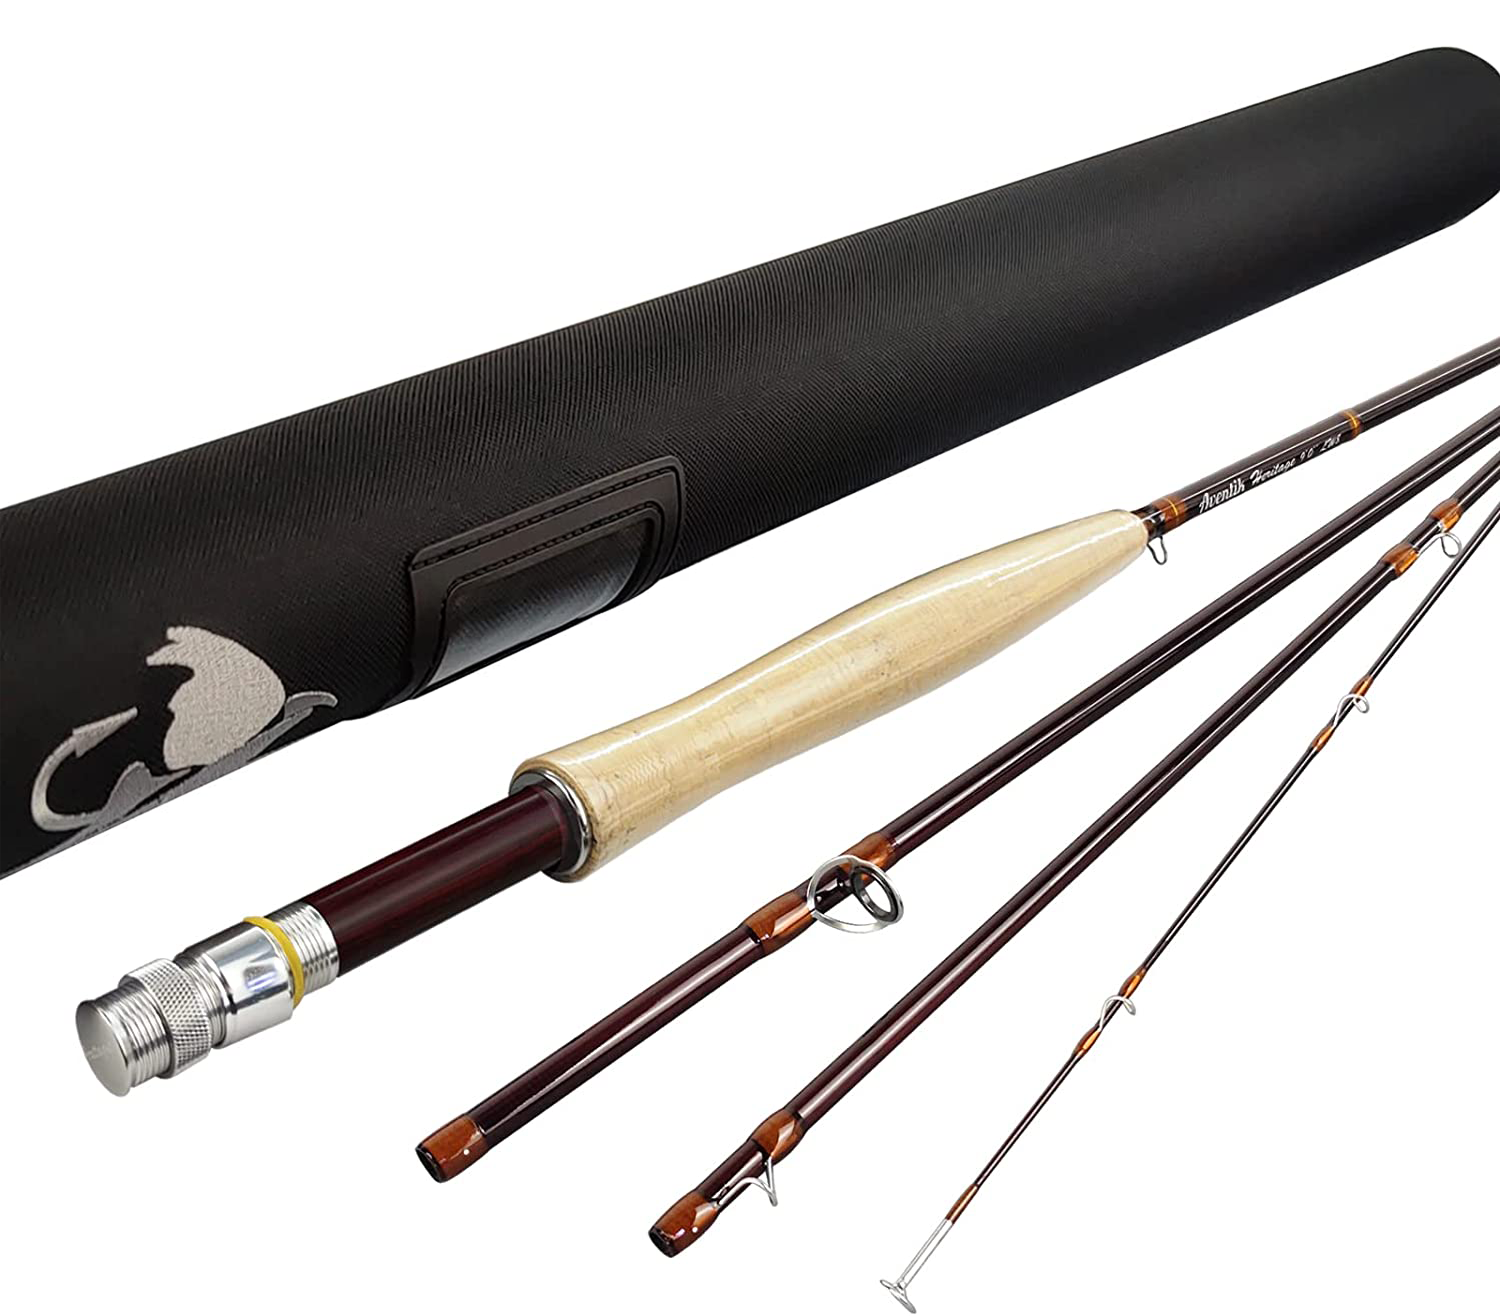 Riverruns Heritage Series Fly Fishing Rod - 4 Pieces 9FT IM8